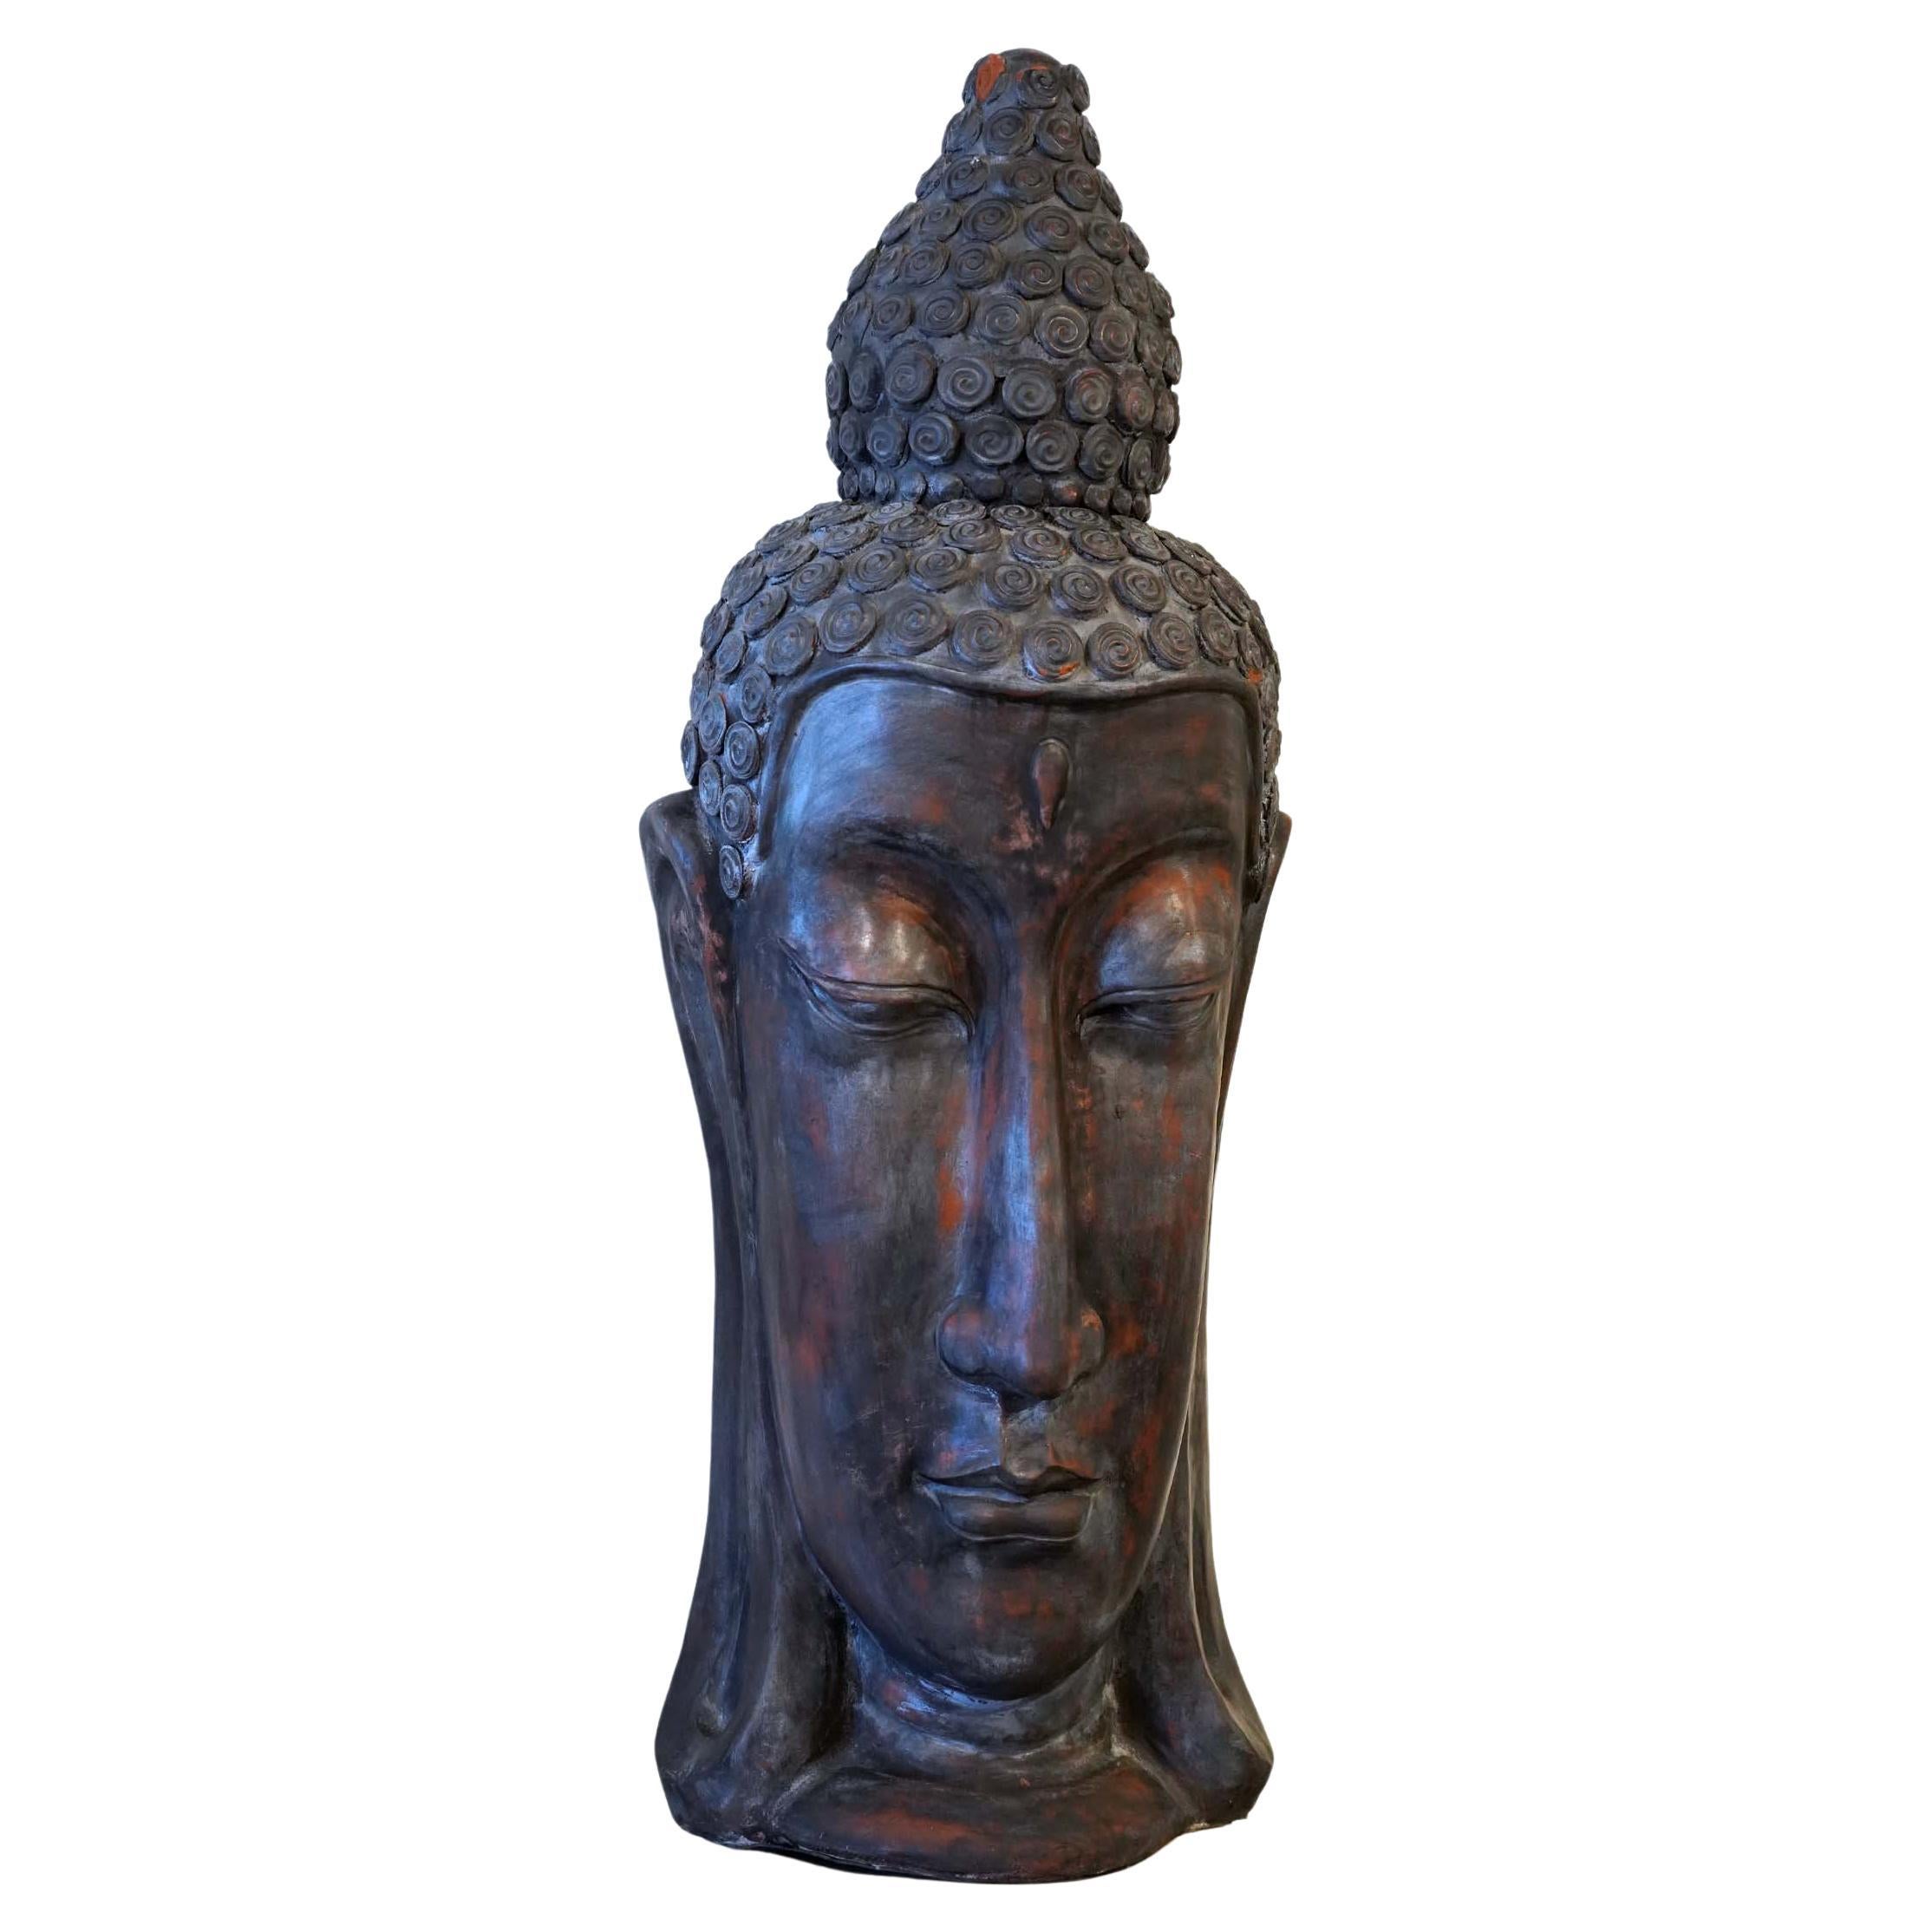 Epic Thai Patinated Terracotta Buddha Head with Elongated Face, 20th Century